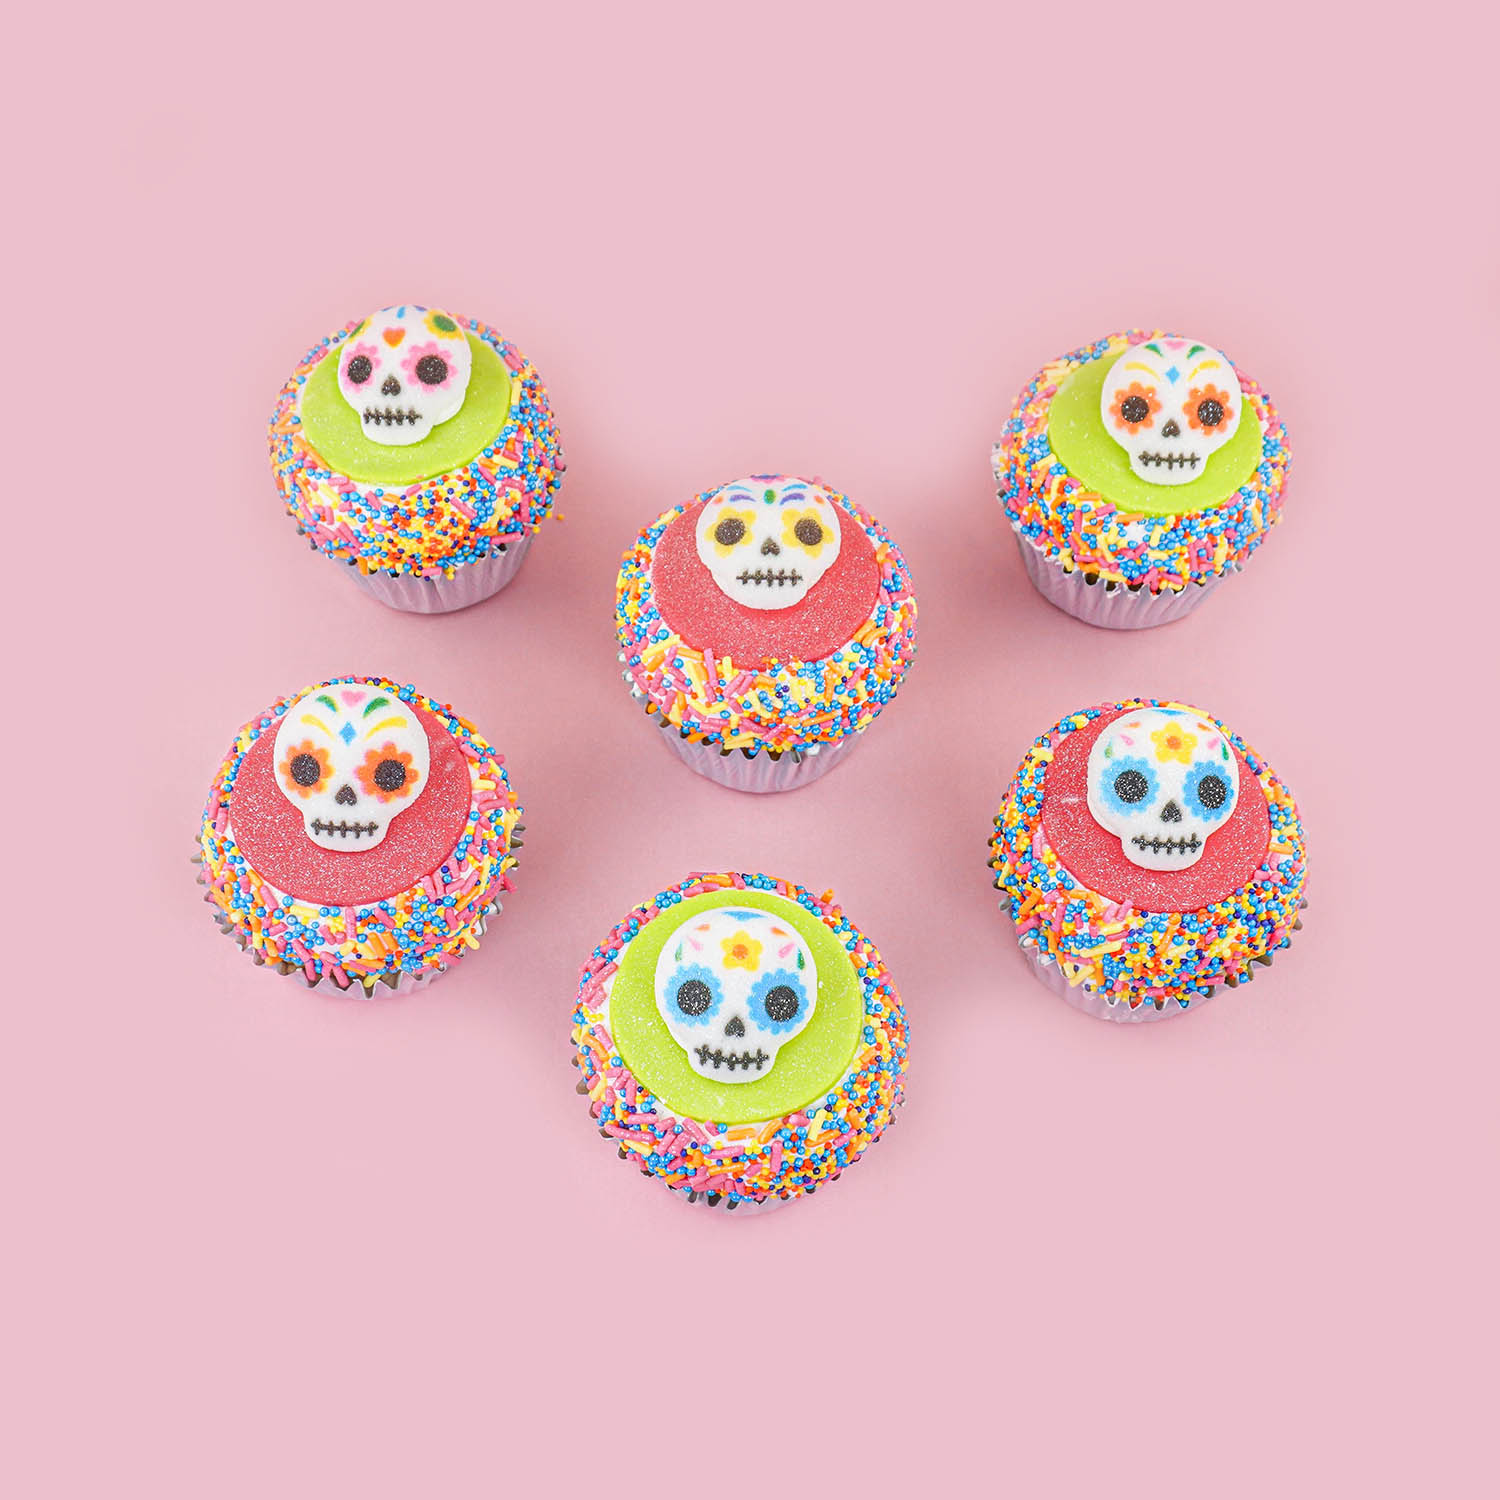 Day of the Dead Sprinkle Sugar Skull Cupcakes